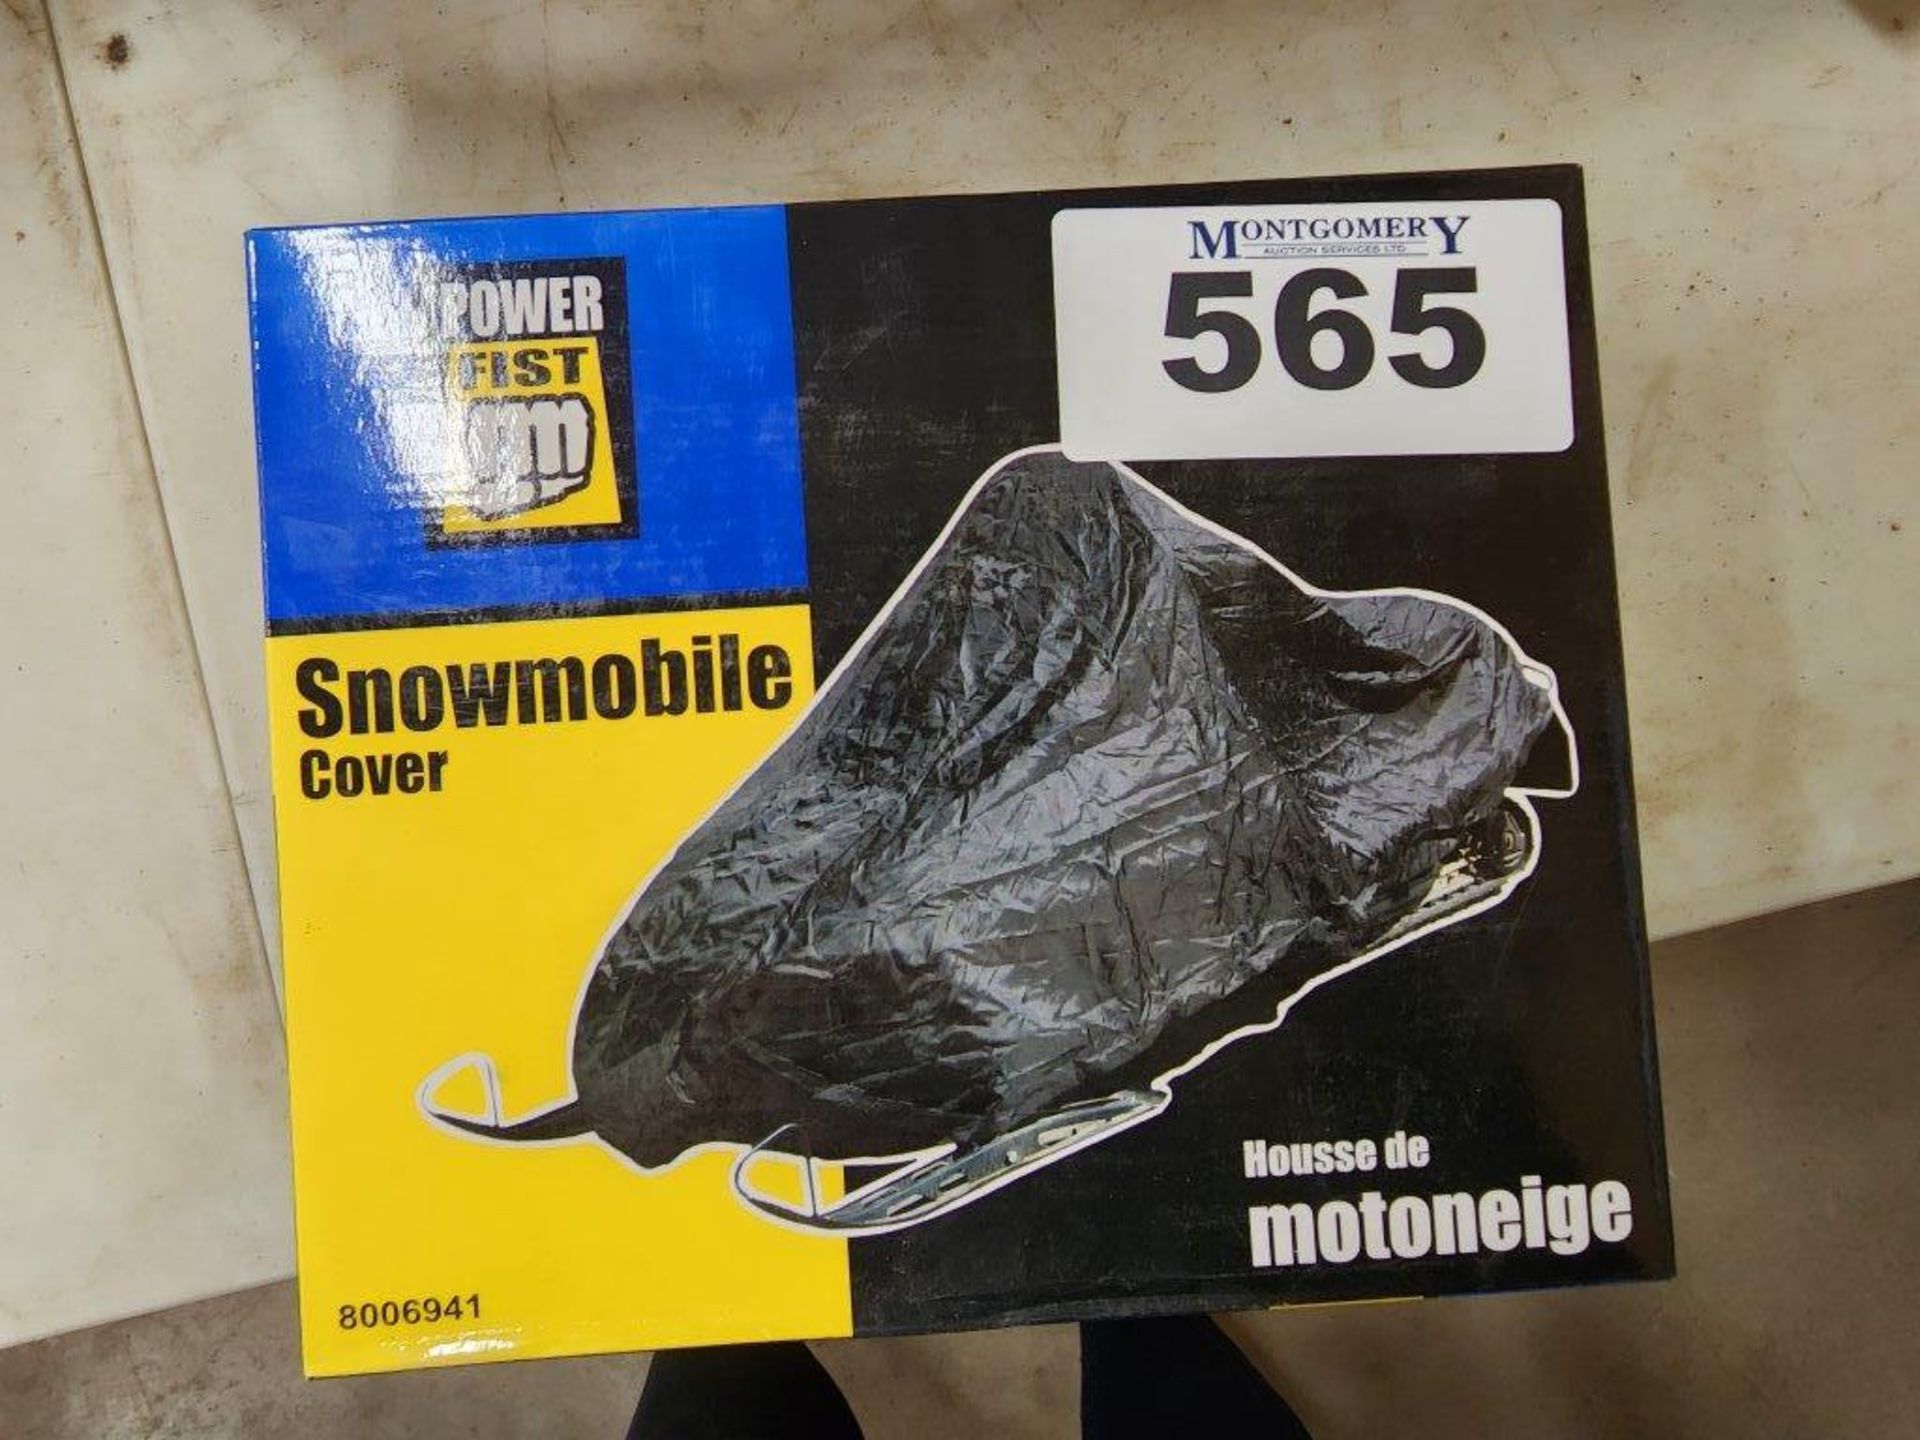 SNOWMOBILE COVER AND 2-CAR COVERS - Image 2 of 4